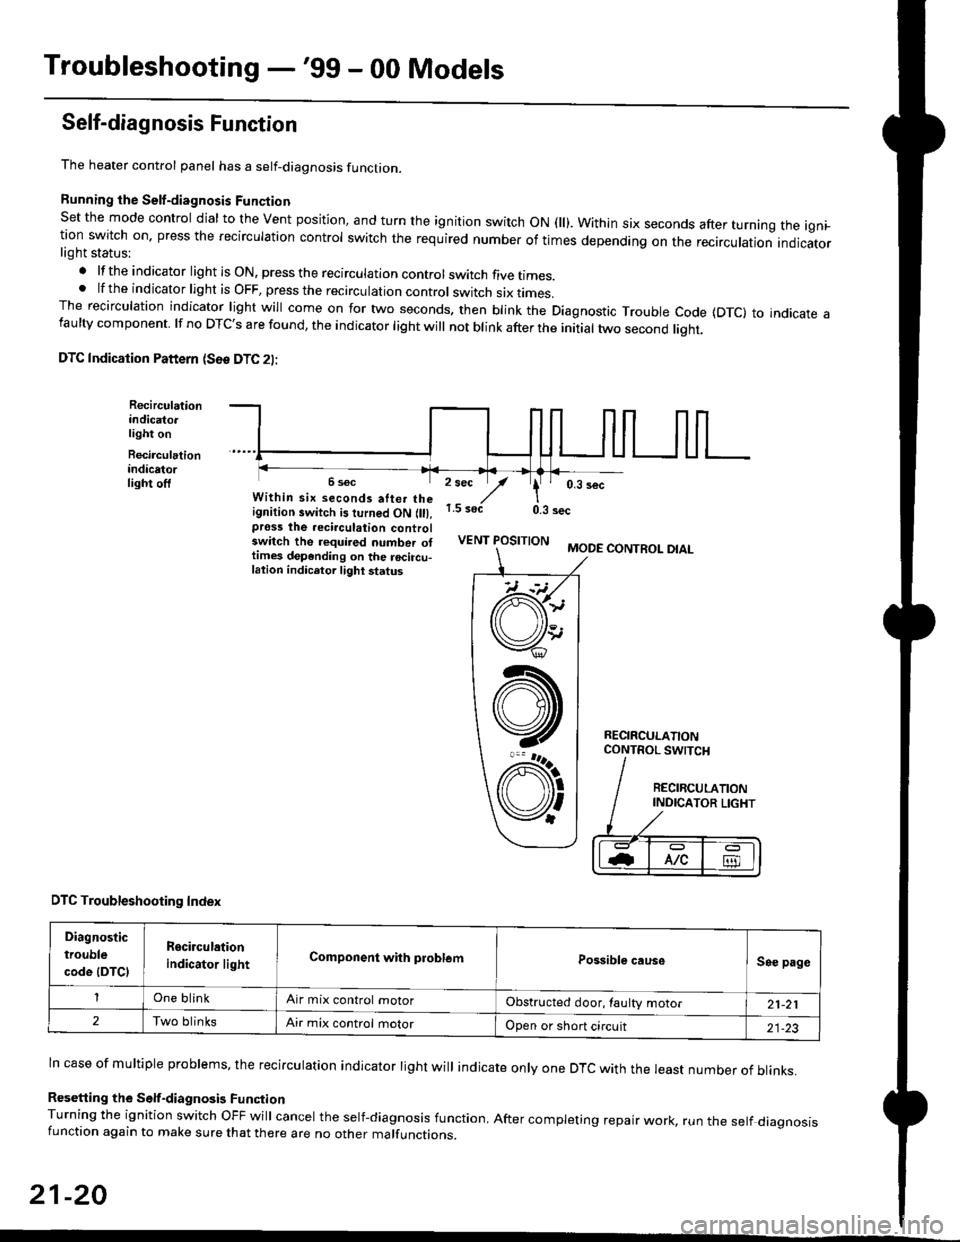 HONDA CIVIC 1998 6.G Workshop Manual Troubleshooting -99 - 00 Models
Self-diagnosis Function
The heater control panel has a self-diagnosis function.
Running the Self-diagnosis Funqtion
Set the mode control dial to the Vent position, and